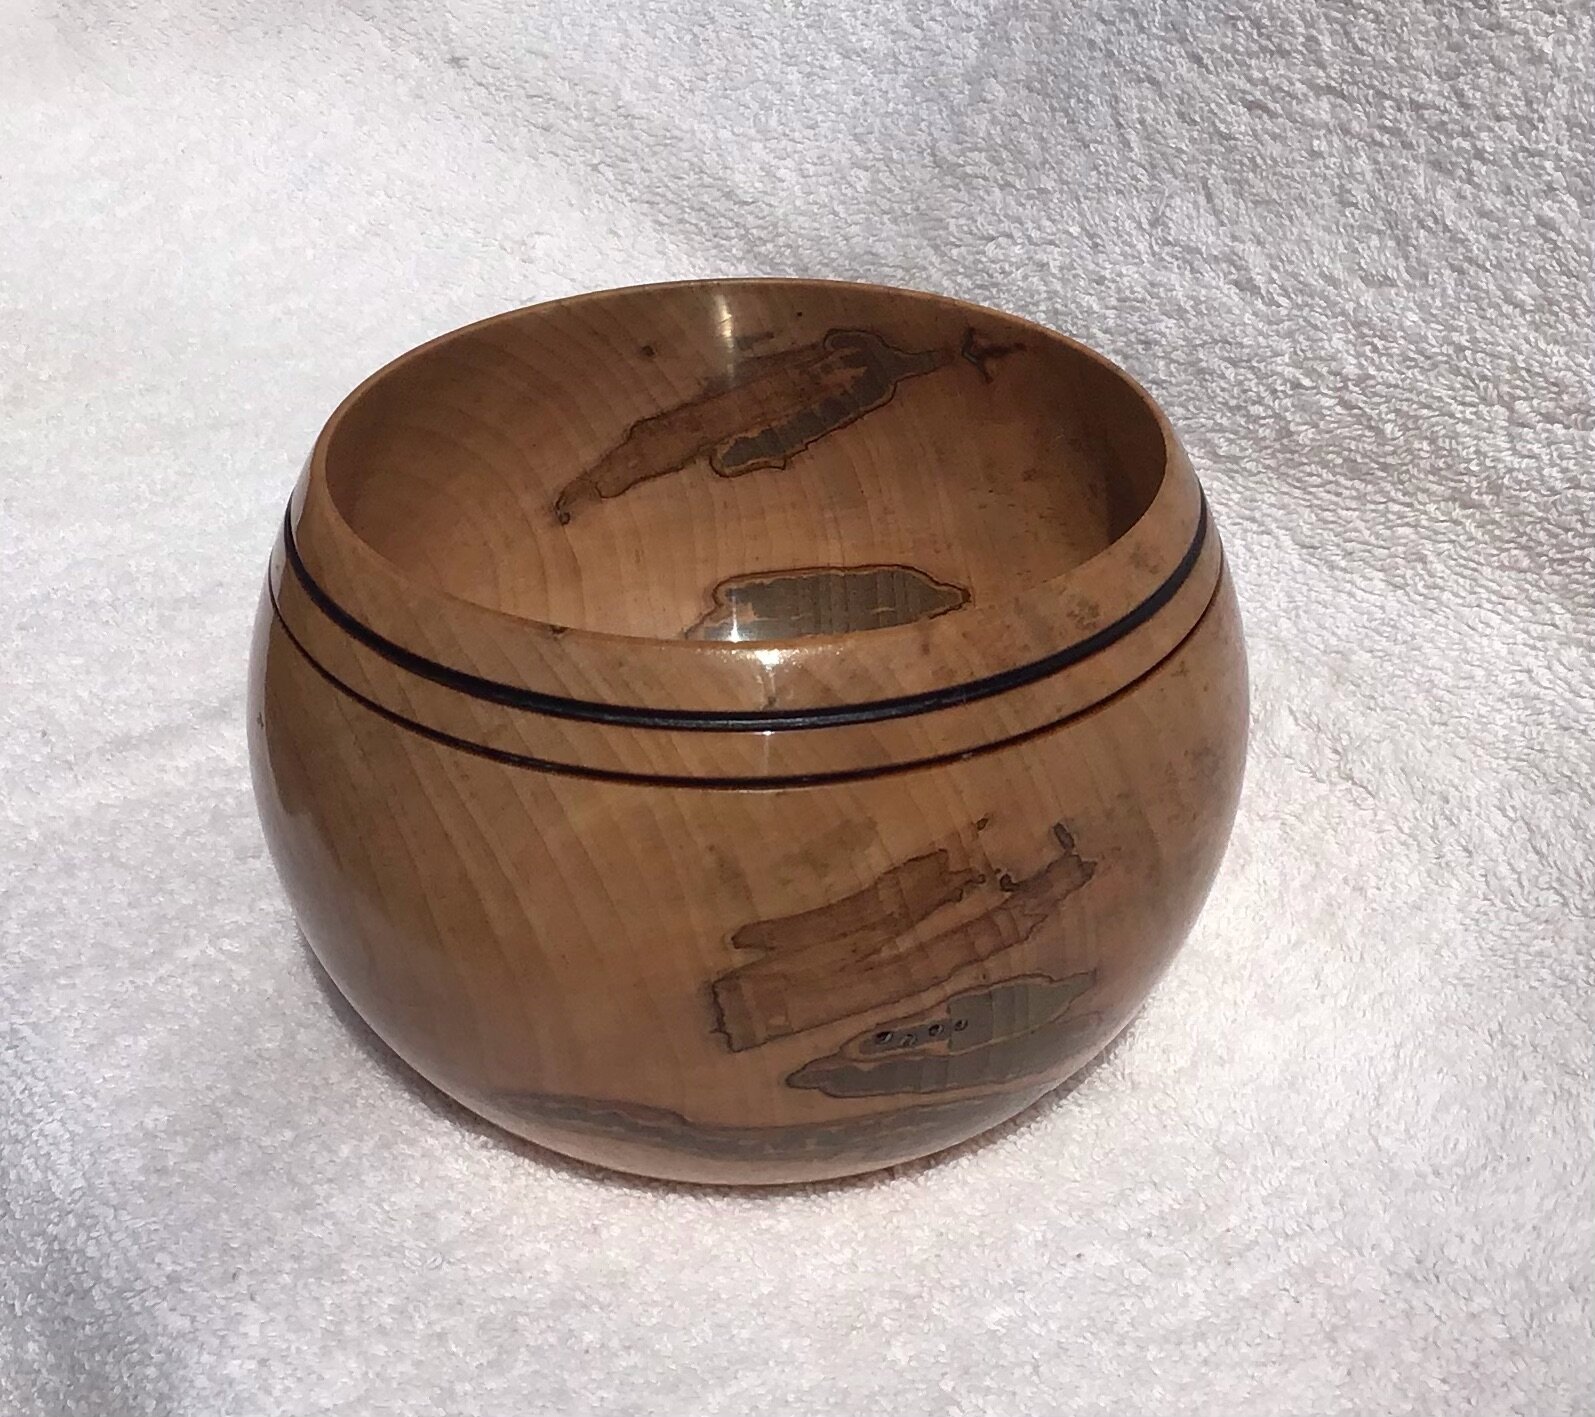  Clinton Scudder spalted maple  bowl 3.75 x 5 